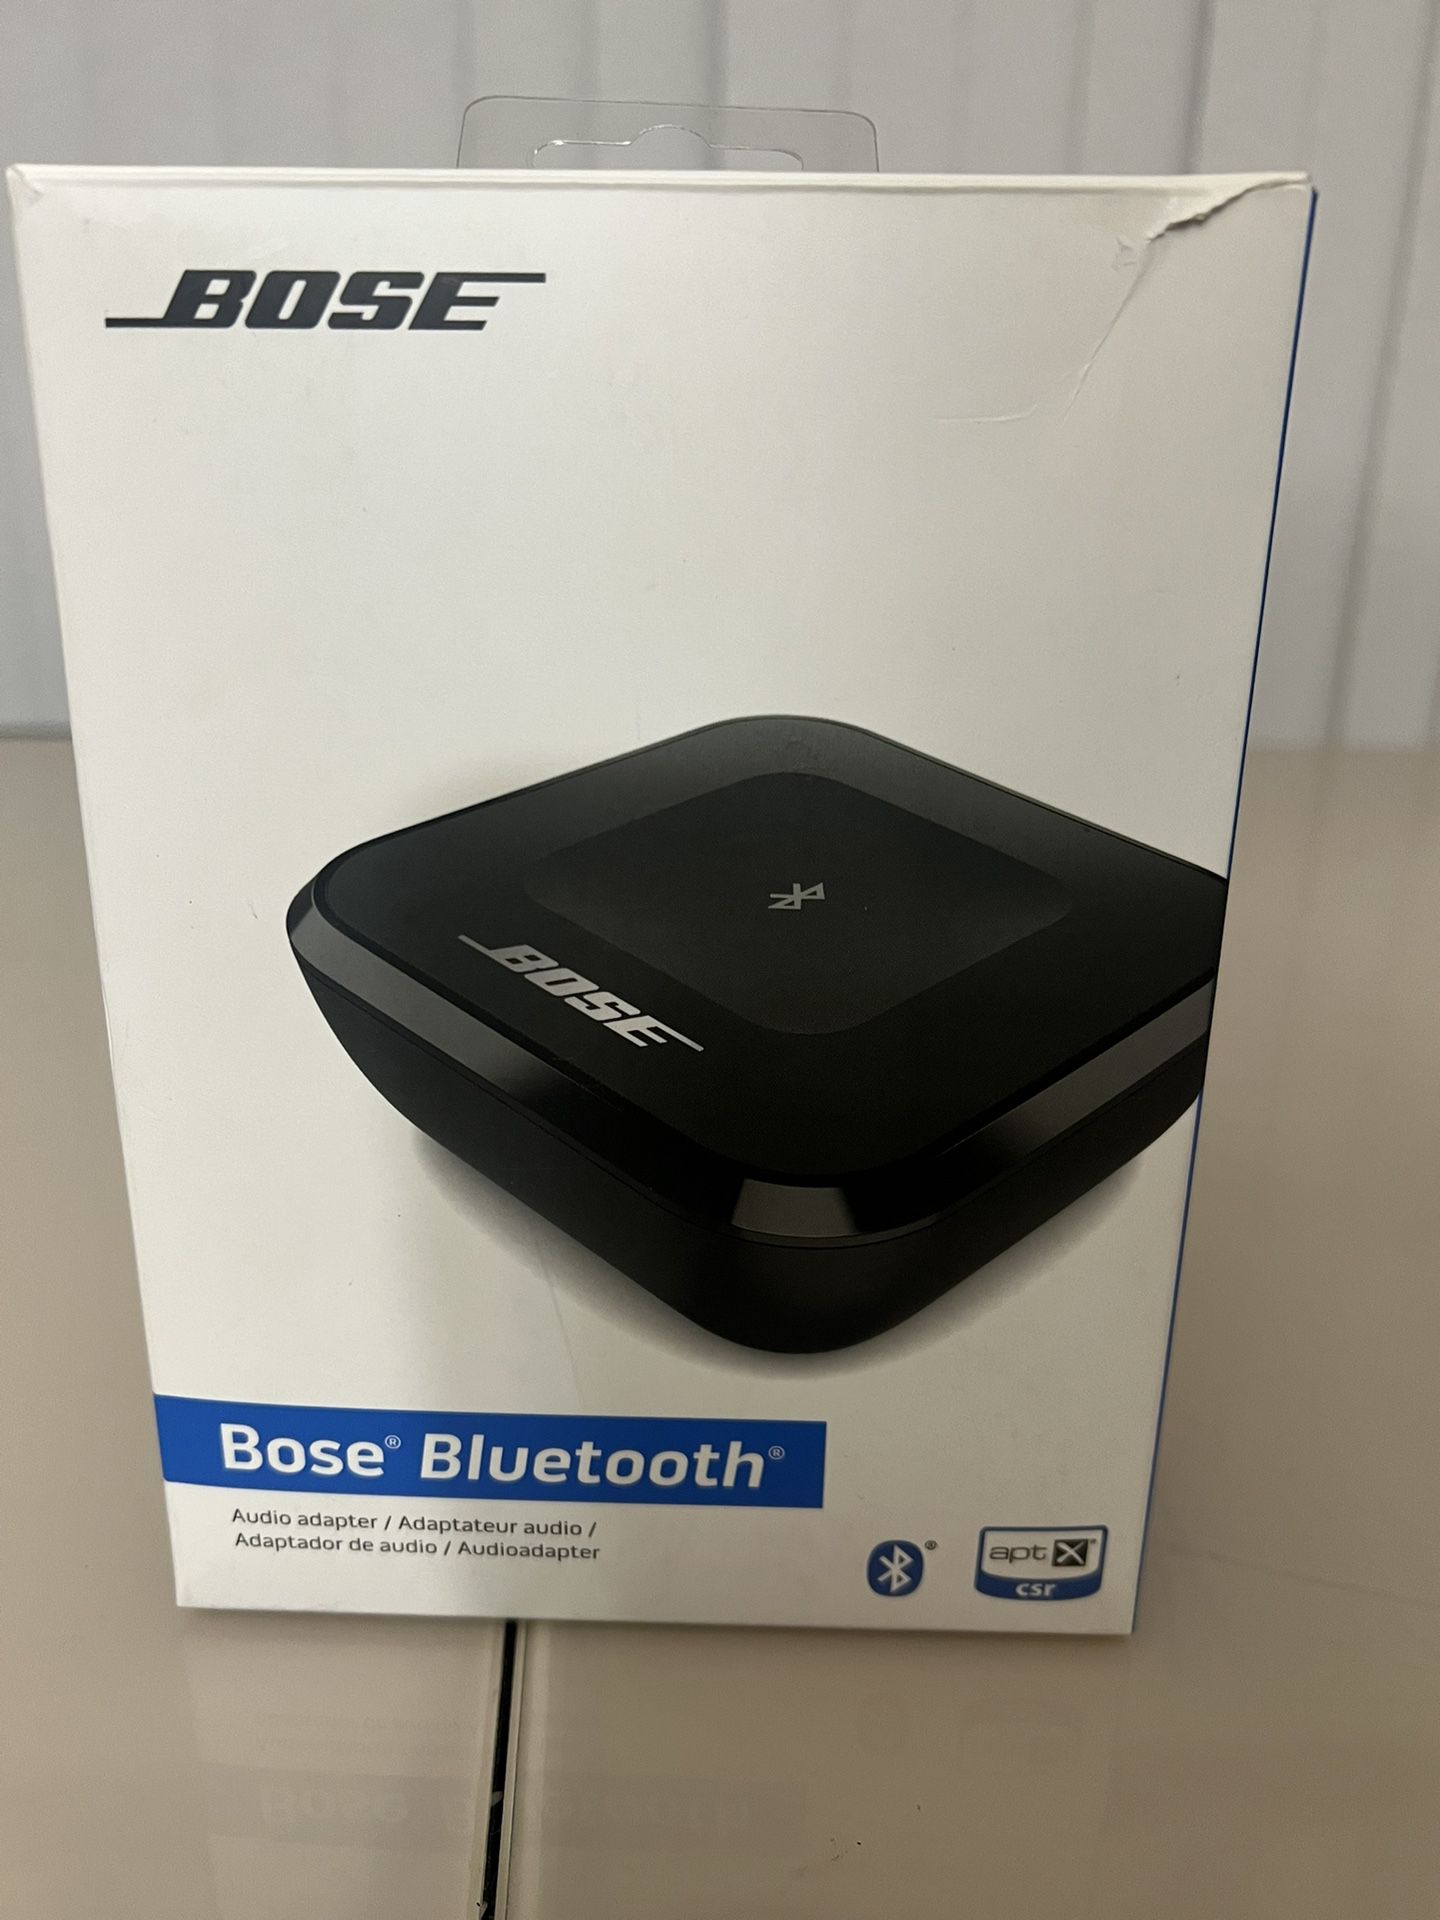 Bose Bluetooth Wireless Audio Adapter Receiver 418048 With all Cables/Adapters. Barely used in excellent condition and fully functional. The box does 